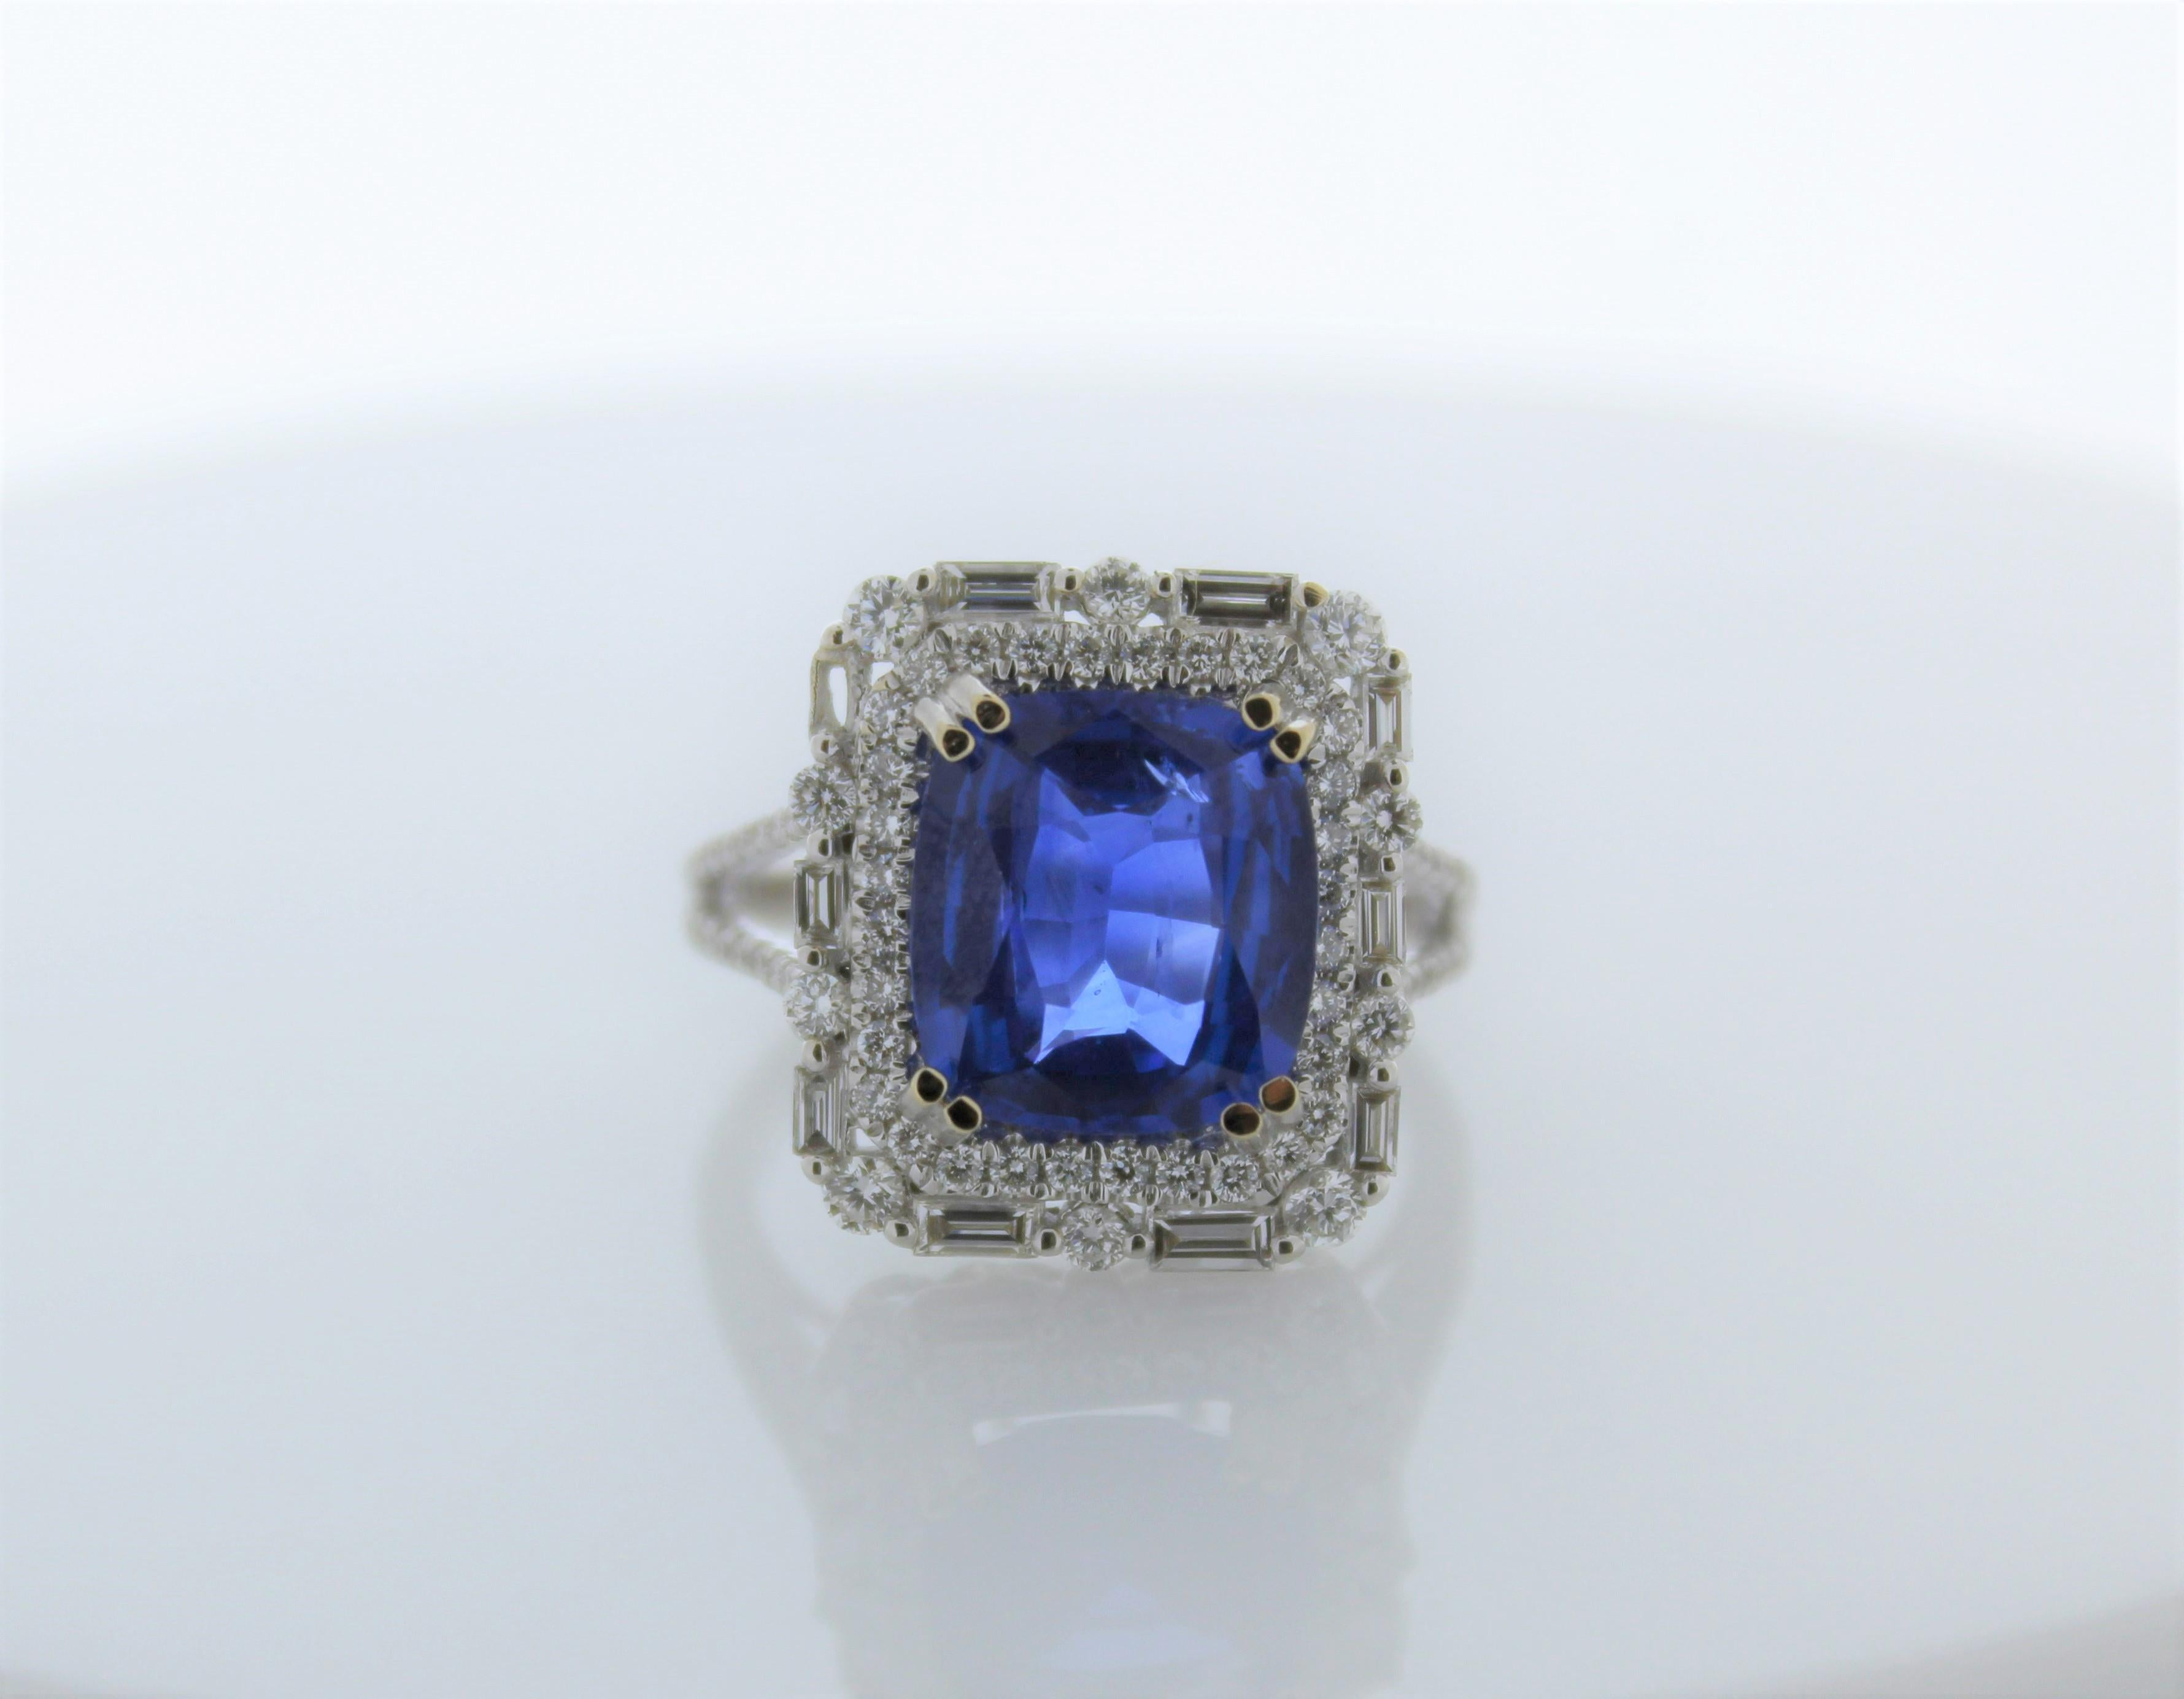 This gorgeous ring showcases a cushion cut blue sapphire that weighs 4.53 carats. It is surrounded by 91 diamonds that total up to 1.85 carats. Set in 18K White Gold. 
